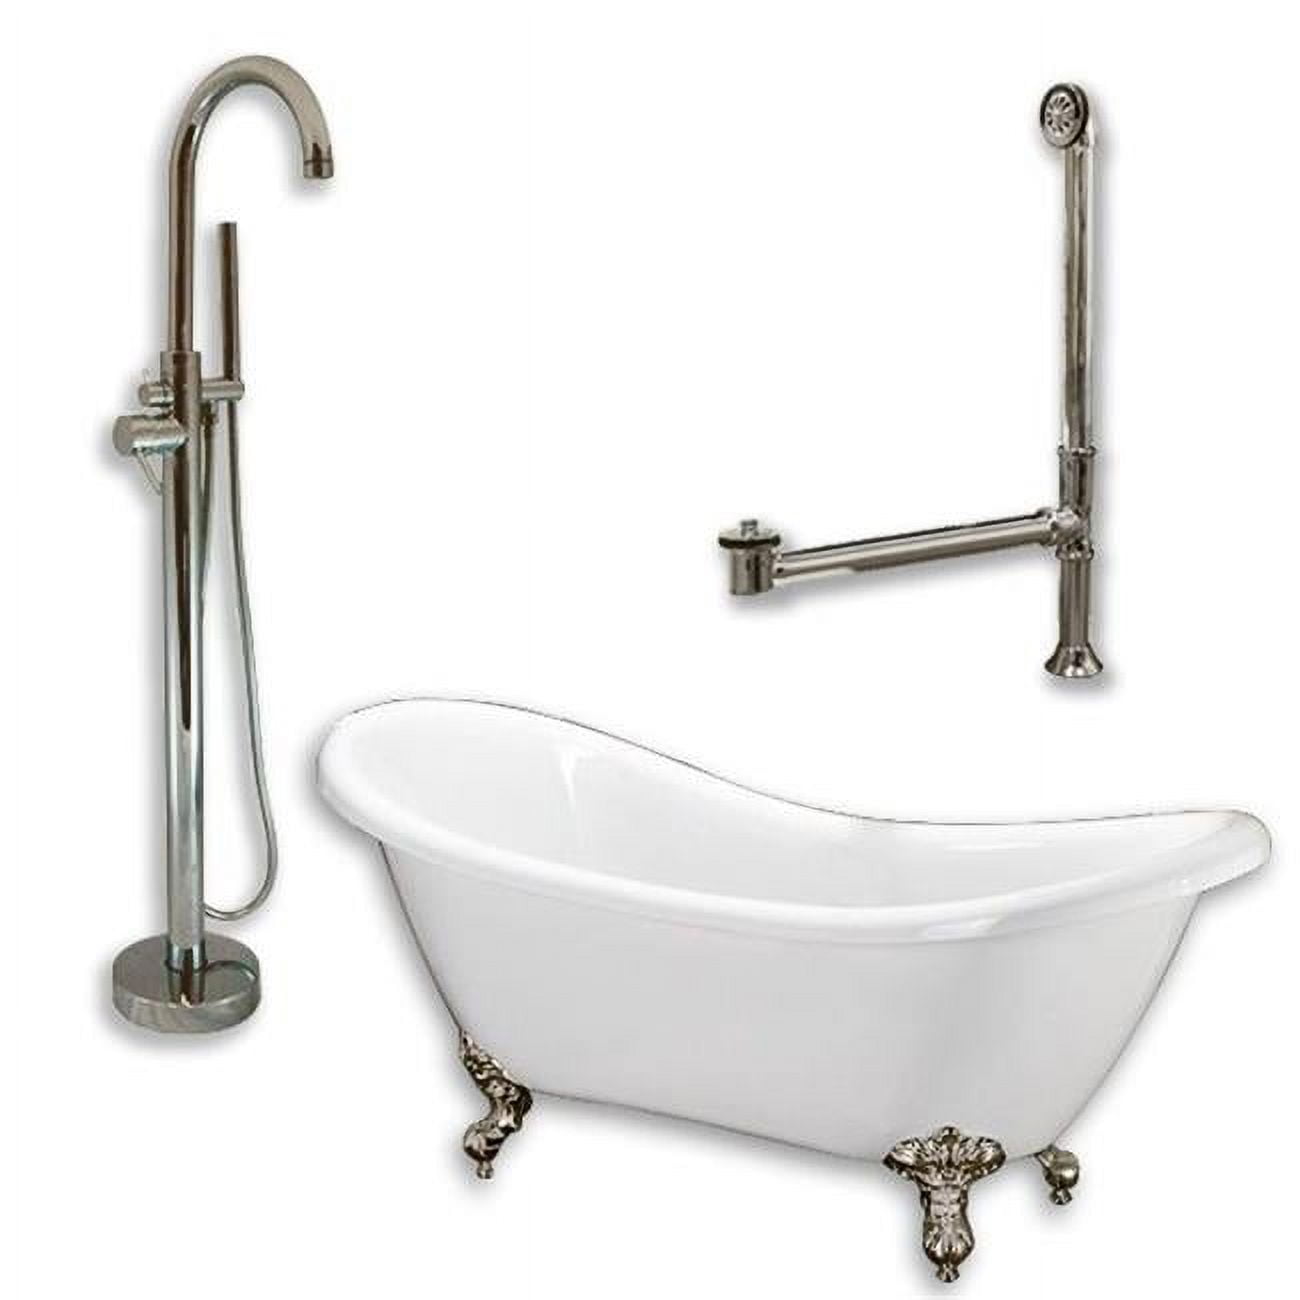 Acrylic Double Ended Slipper Tub With 2 In. Pedestal Holes Deck Risers, Classic Telephone Style Faucet & Brushed Nickel Plumbing